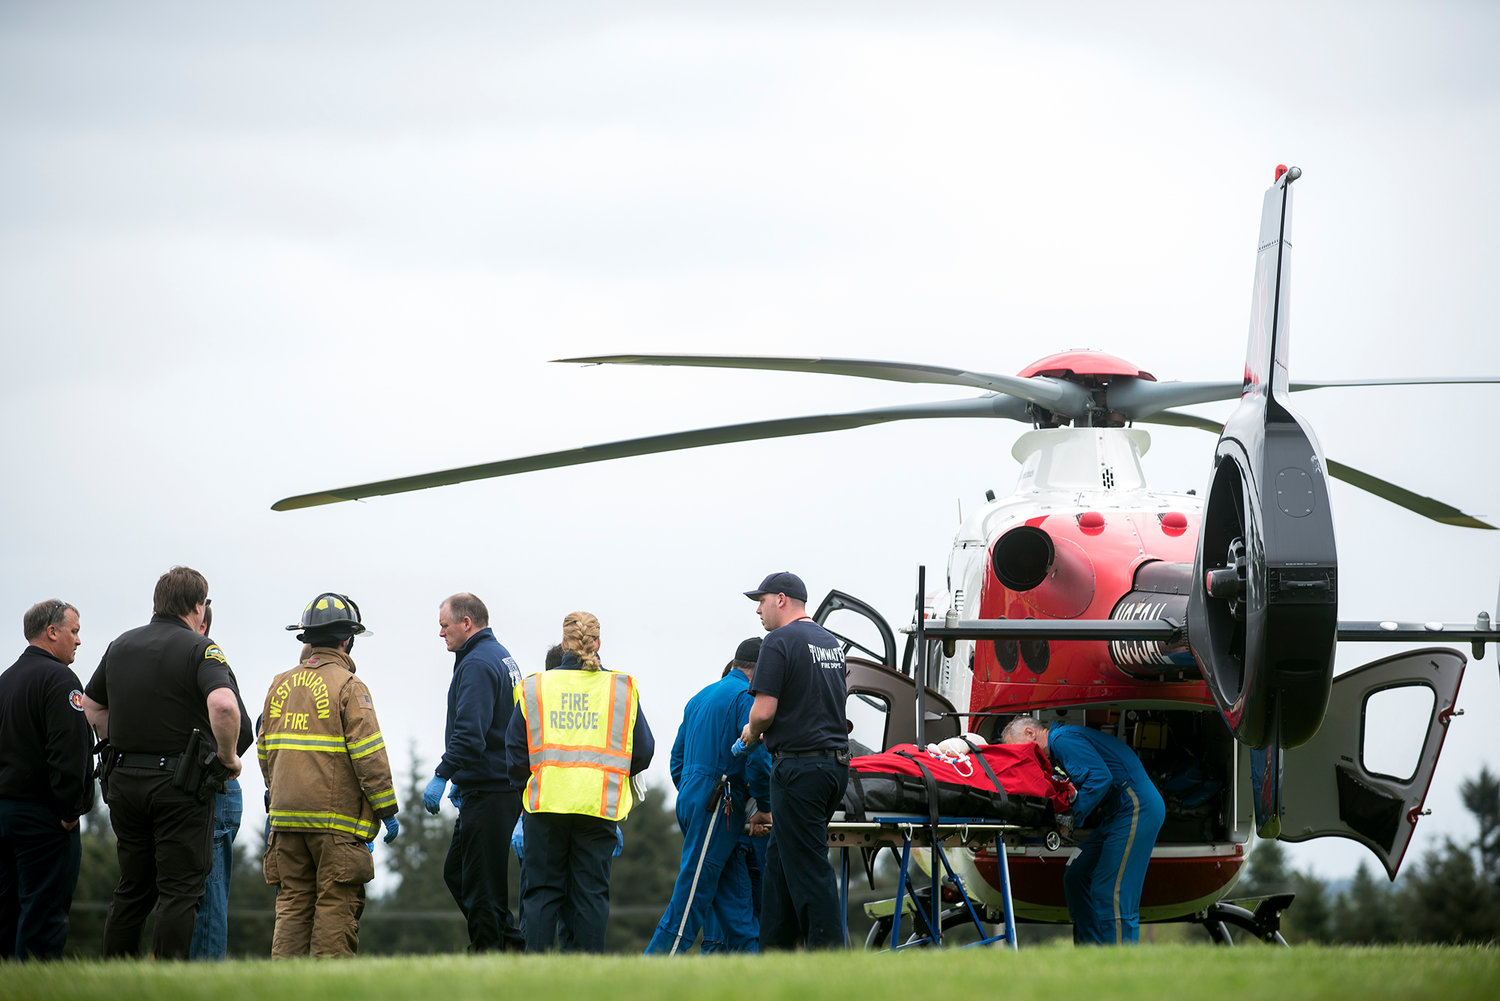 A 73-year-old man who crash landed his plane into a field in Grand Mound on Tuesday afternoon is loaded onto a MedicOne helicopter at Rochester High School prior to being transported to Harborview Medical Center in Seattle. According to the West Thurston County Fire Department, the man was in stable condition after being pulled from the cockpit of the plane.